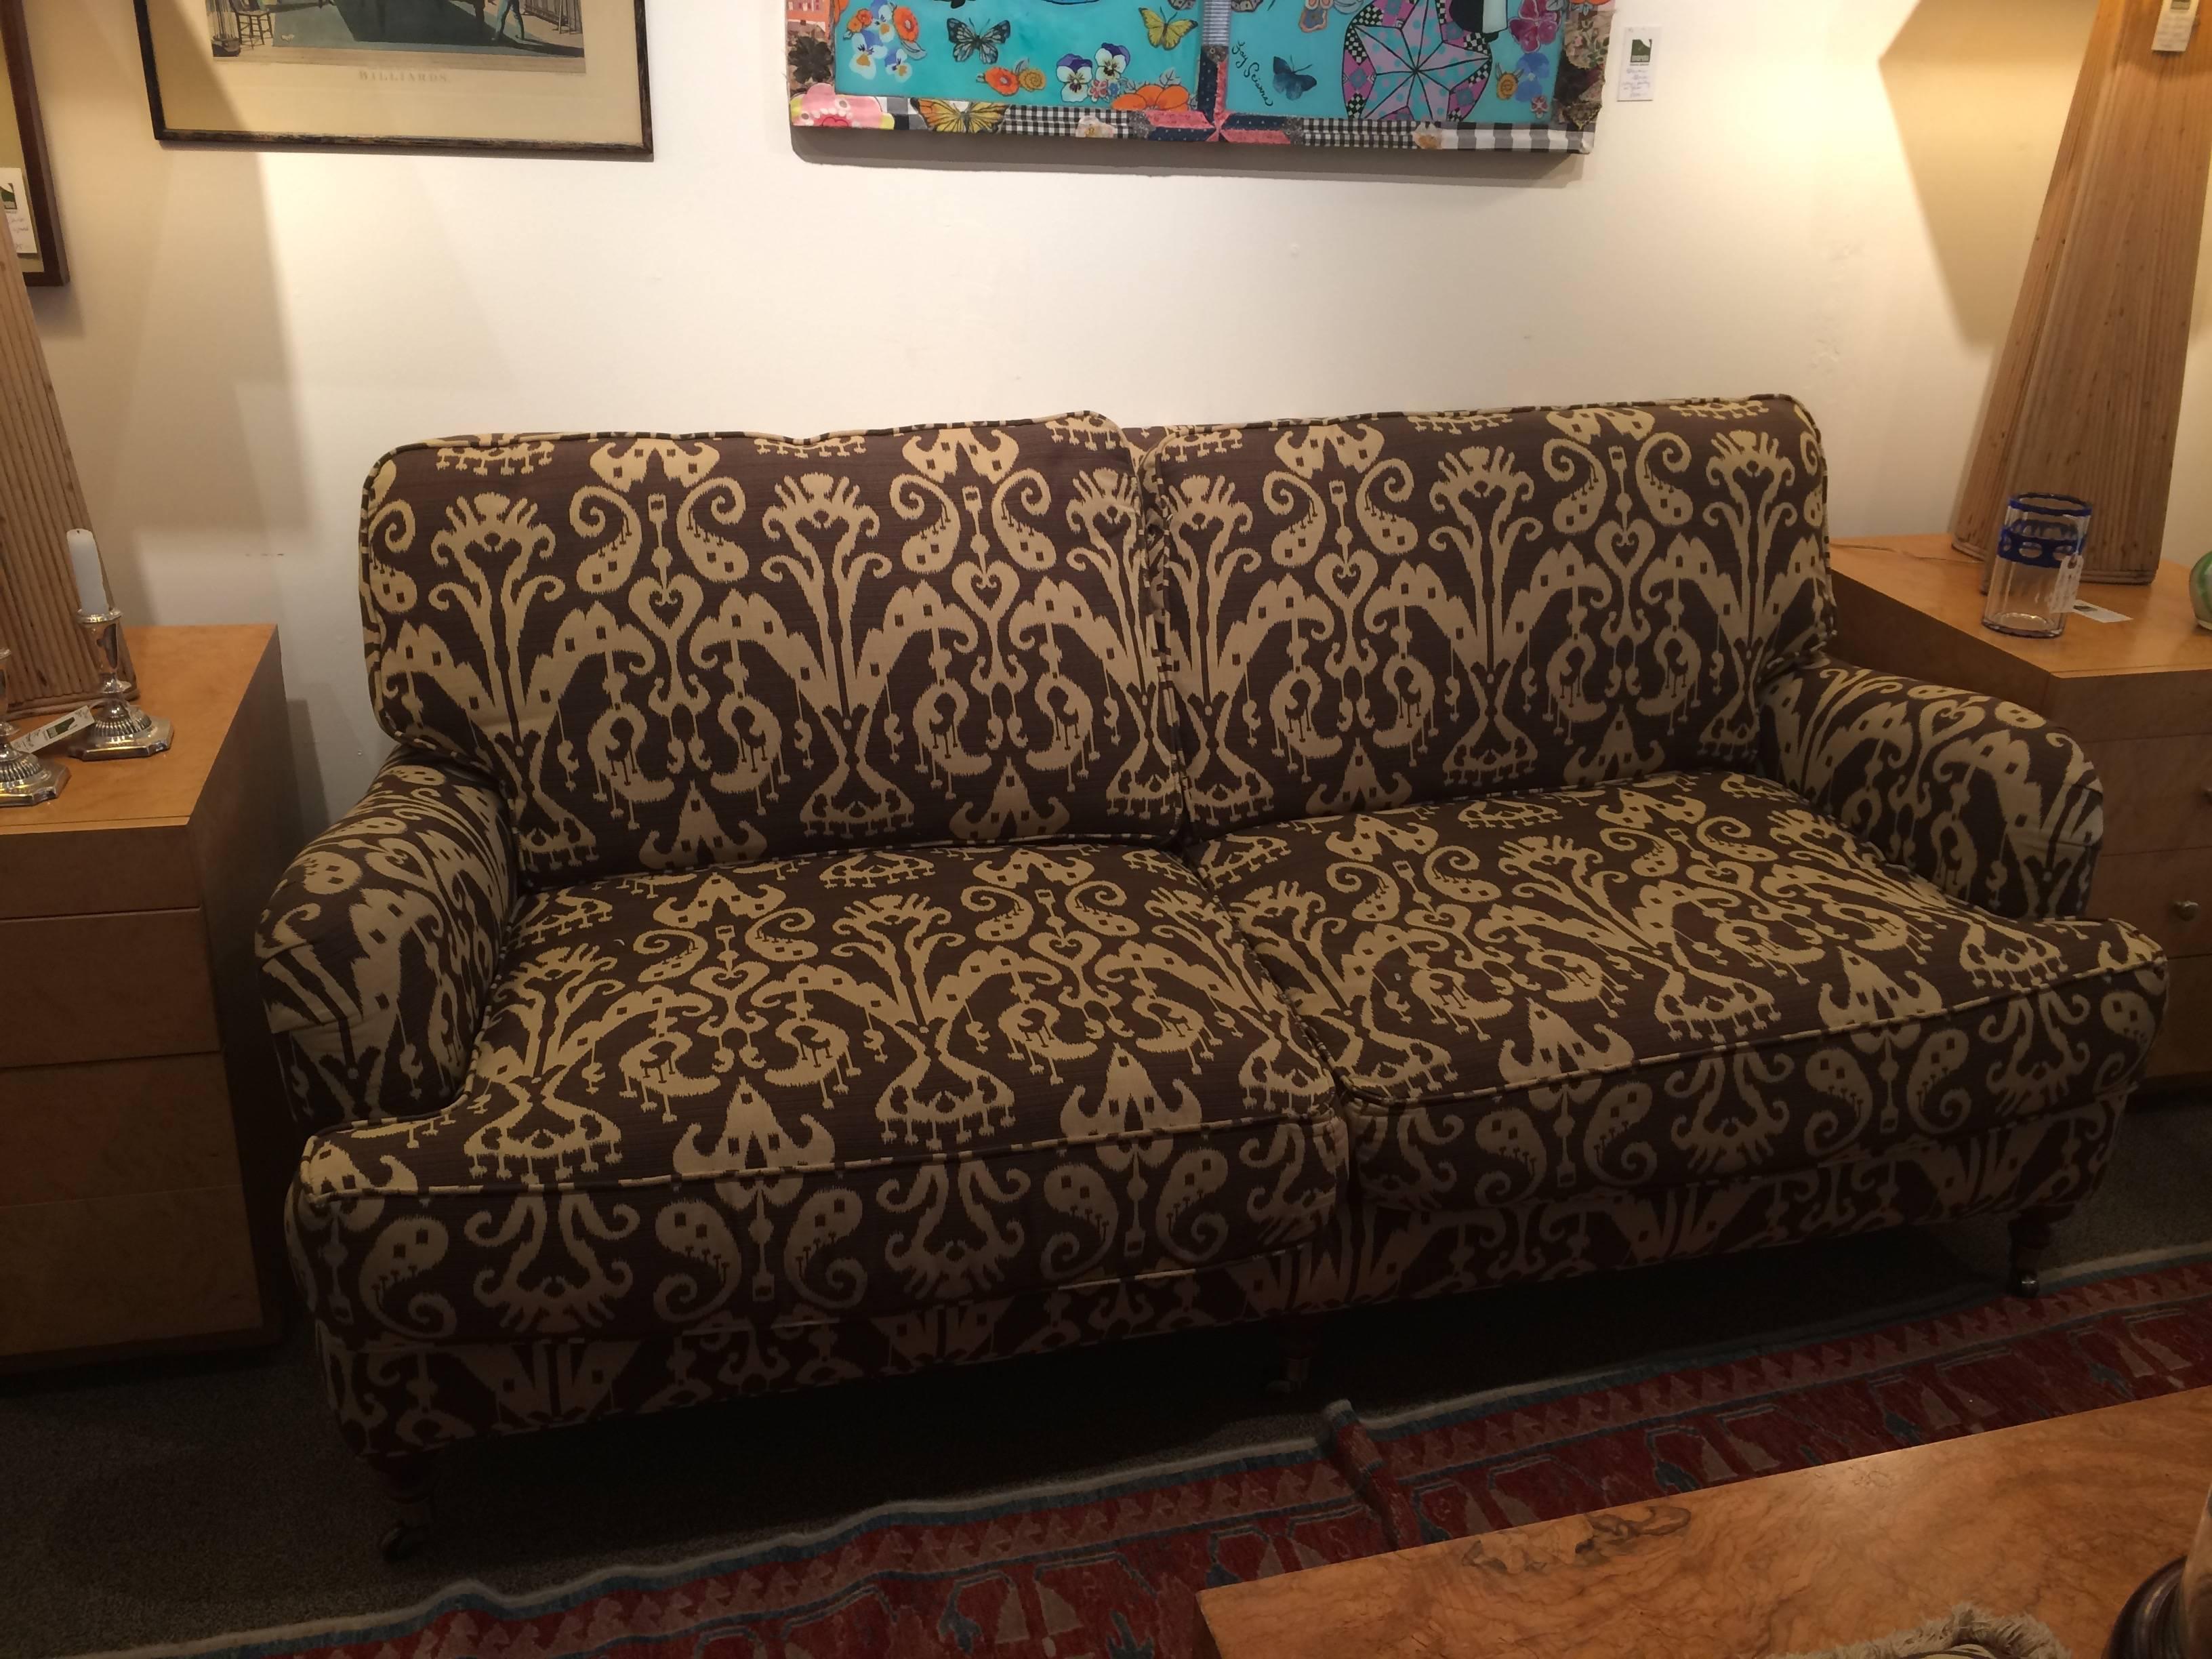 Great looking sofa by Lee Industries with two-seat cushions and two back cushions and two matching extra pillows. Custom brown and cream Ikat fabric.
Very comfortable!